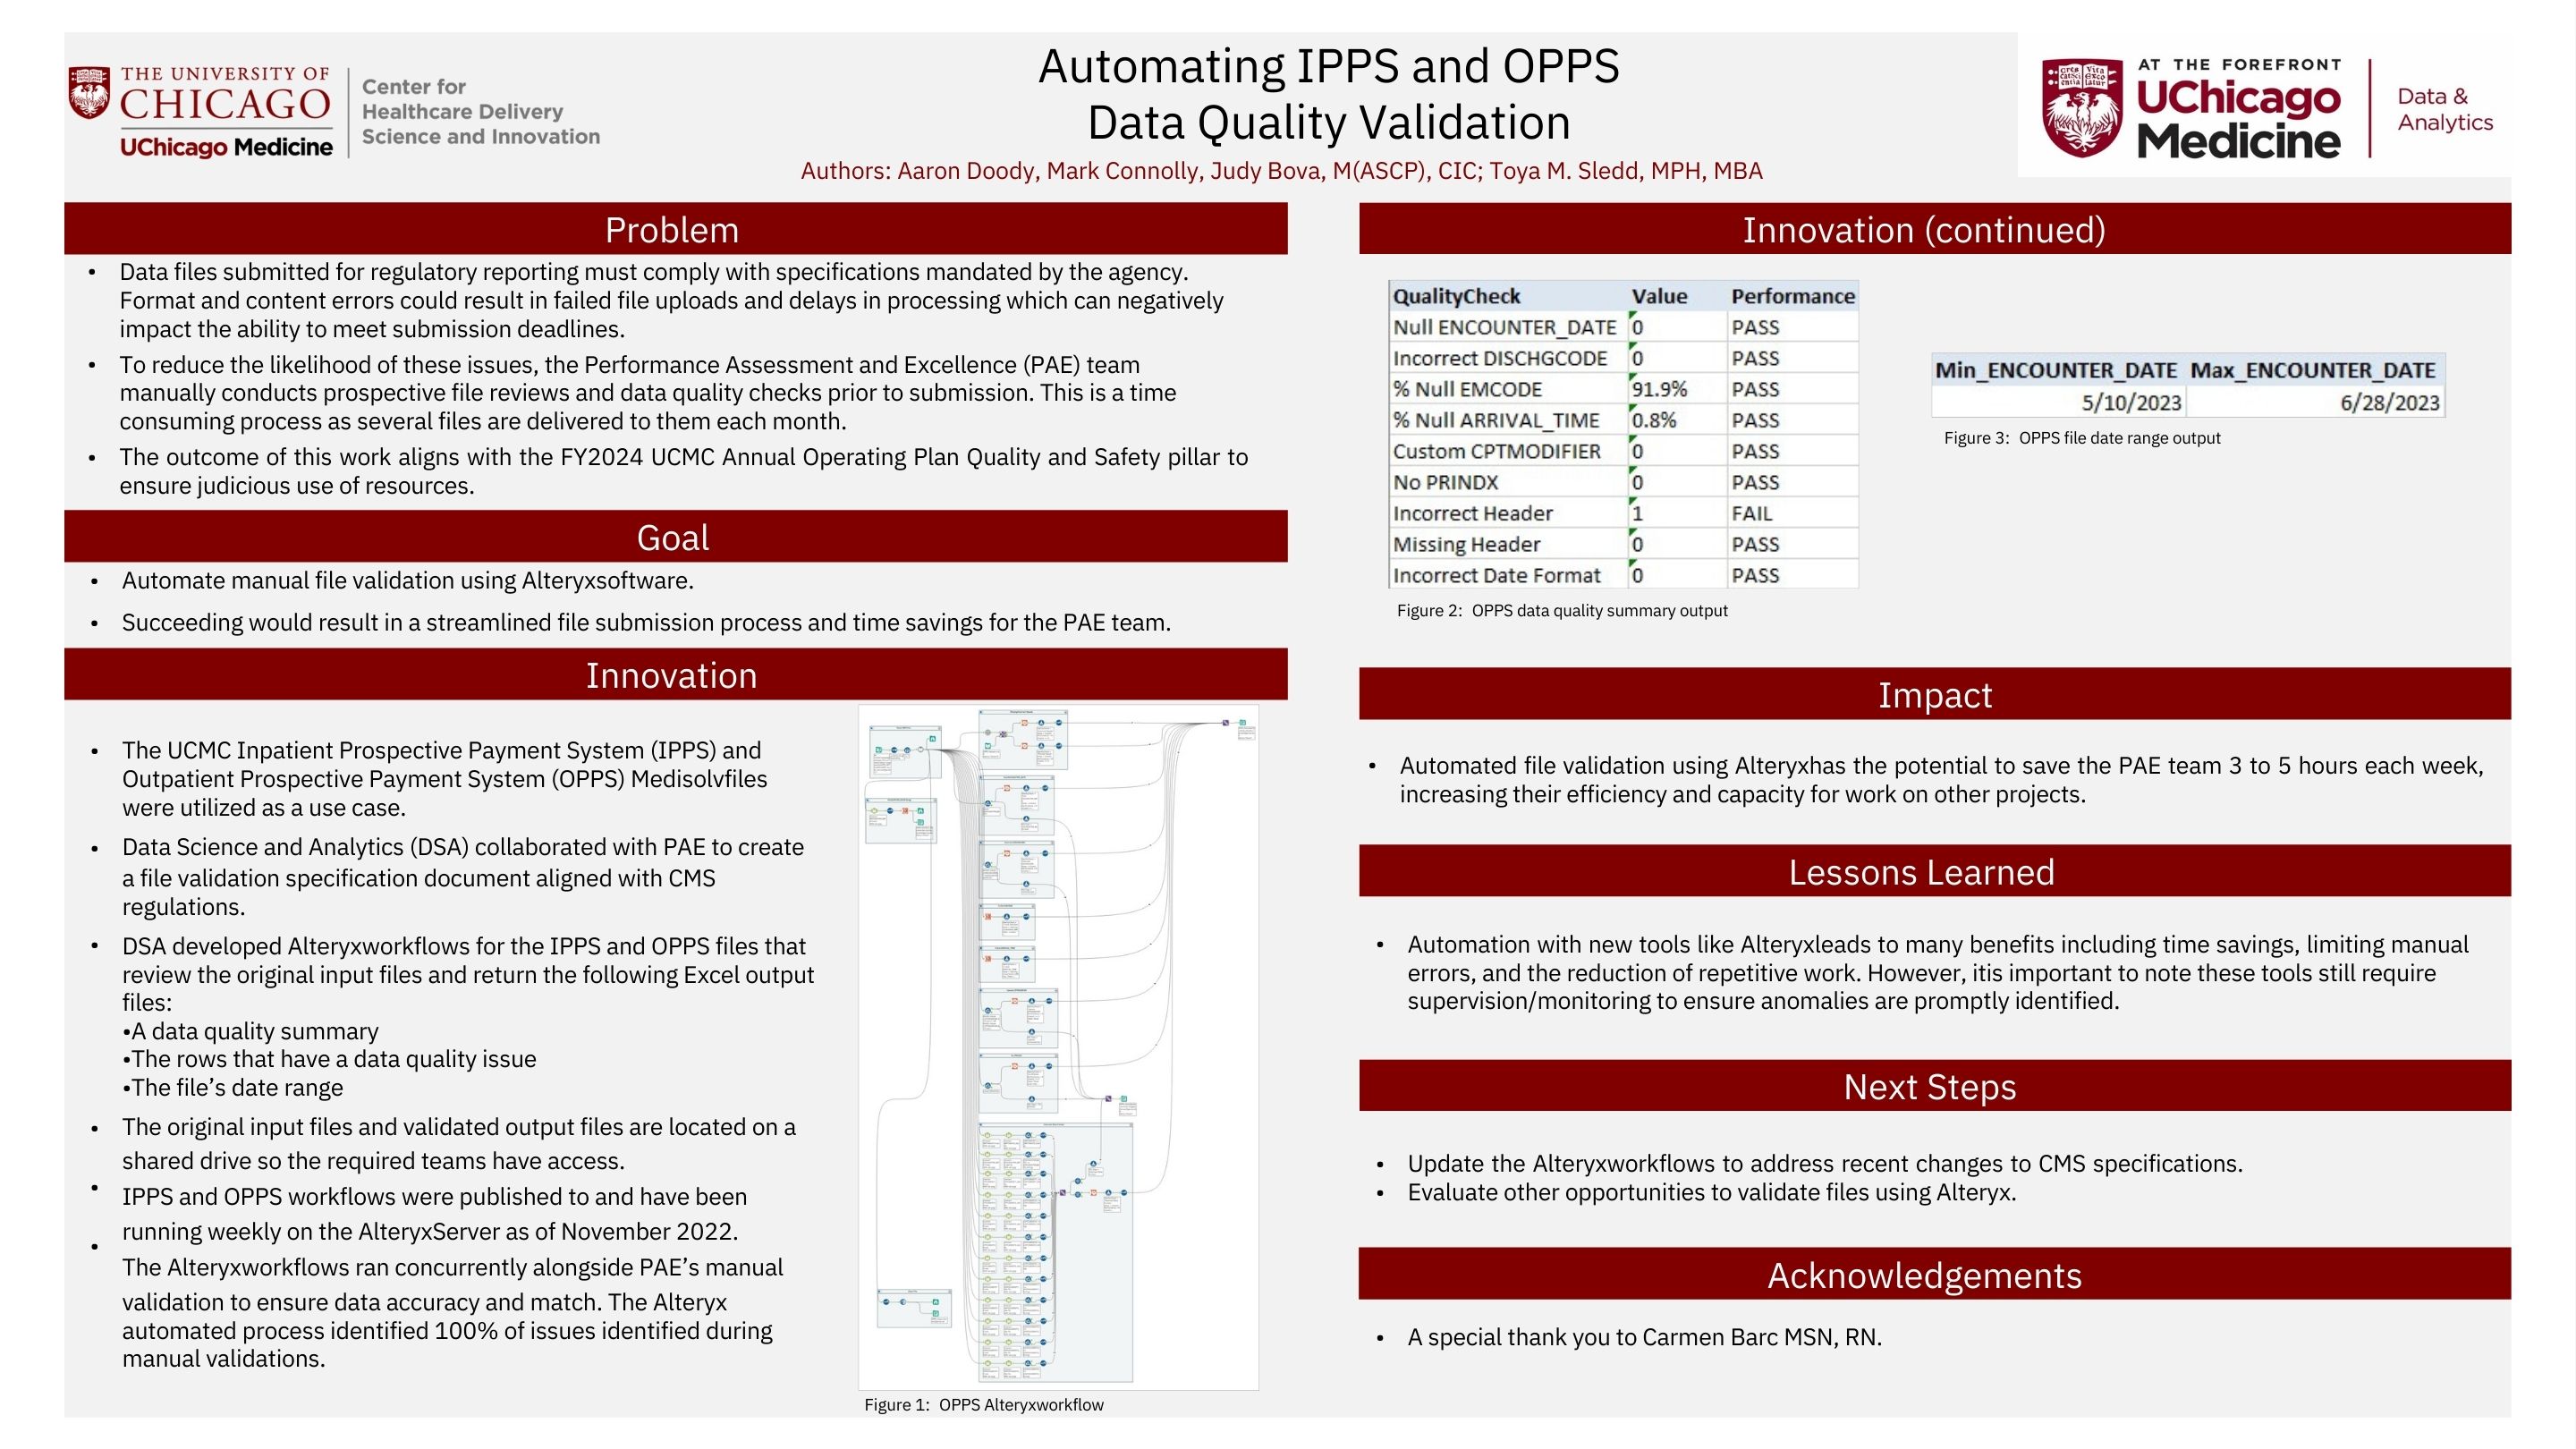 DOODY_Automating-IPPS-and-OPPS-Data-Quality-Validation